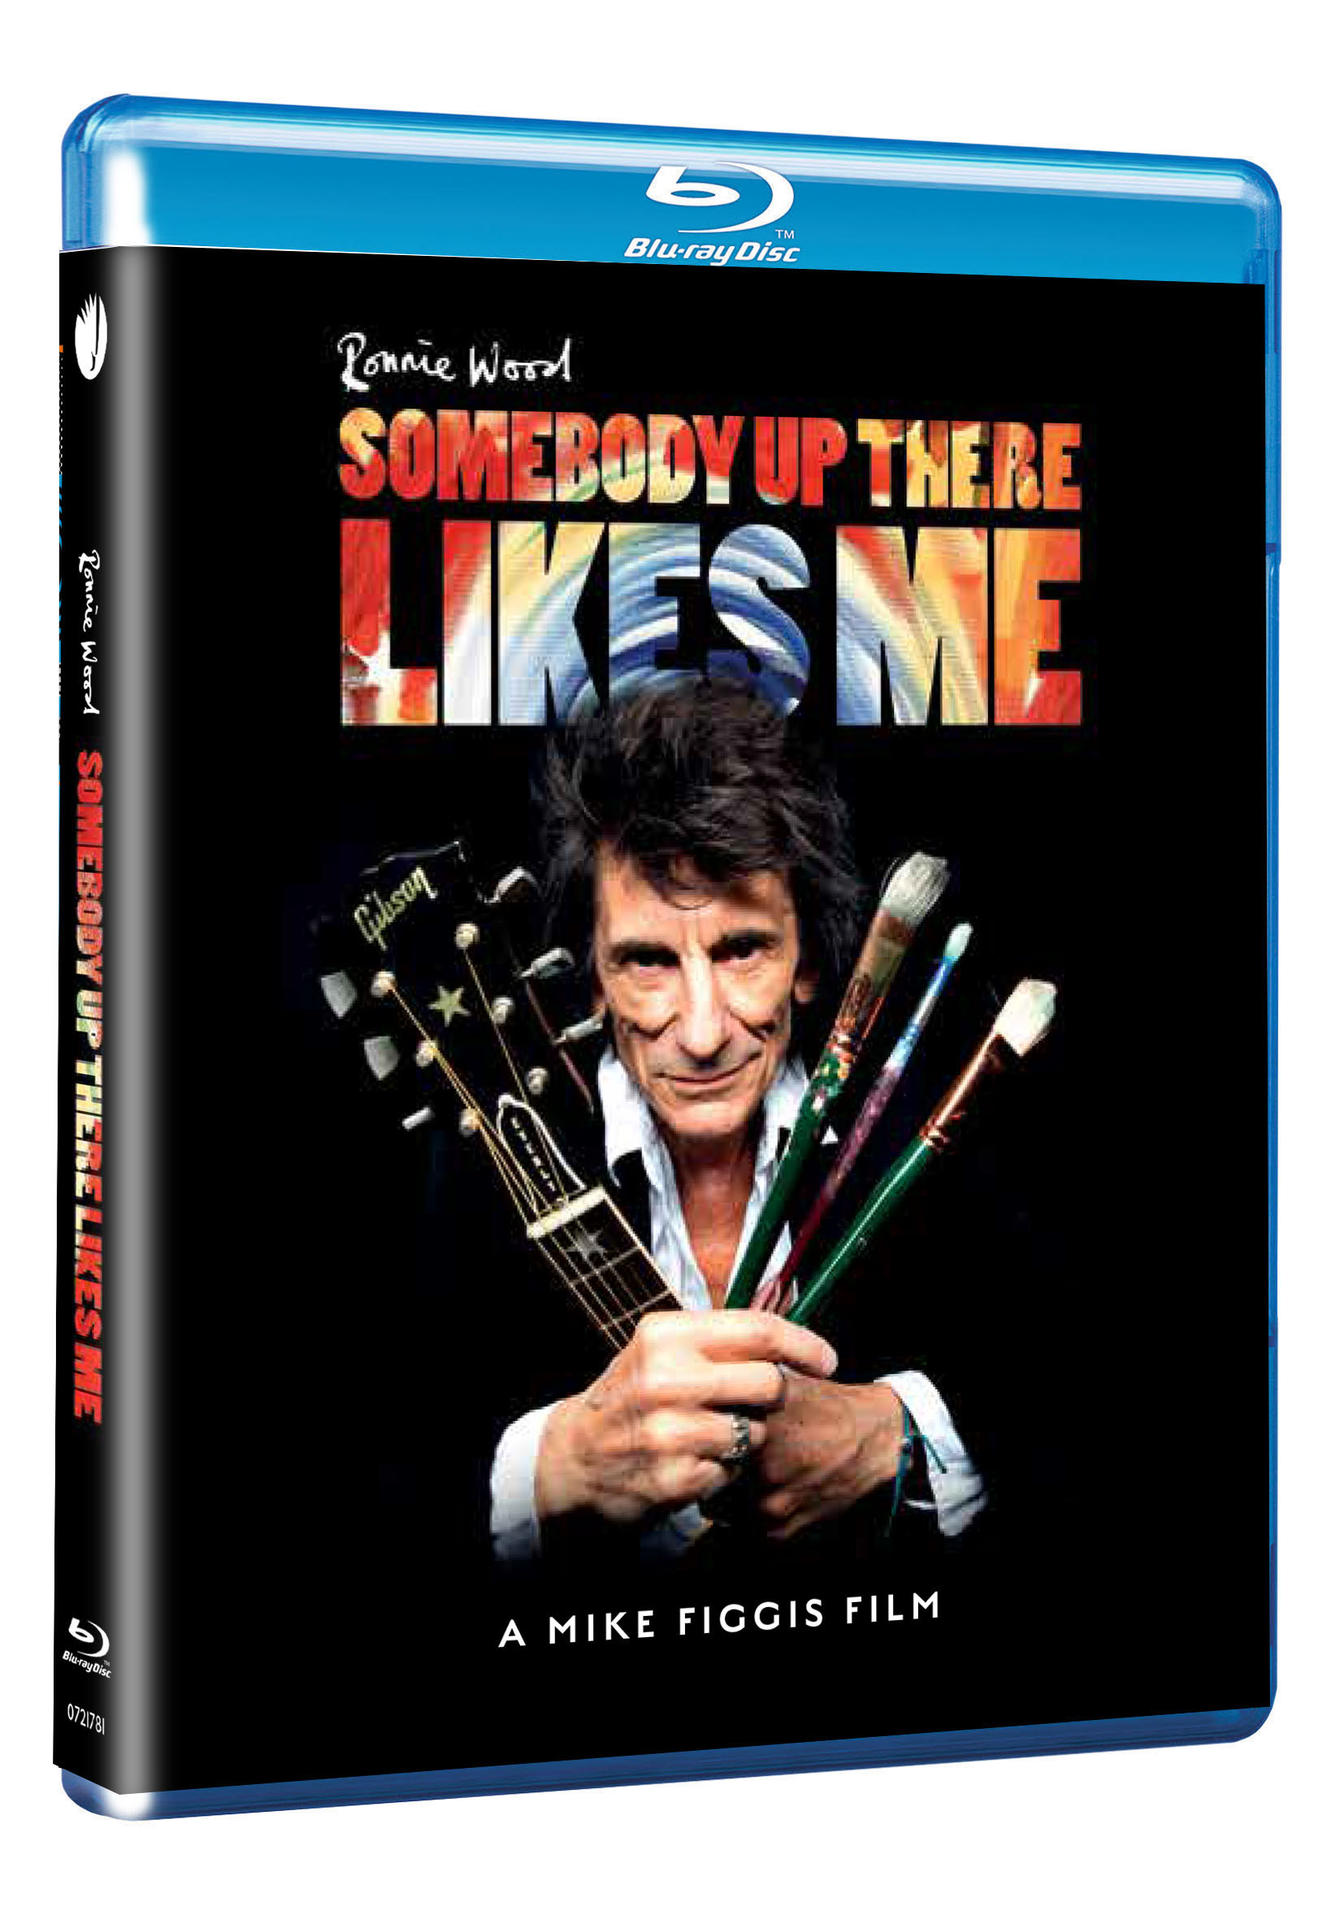 Ronnie Wood Likes Somebody Up Me There - (Blu-ray) 